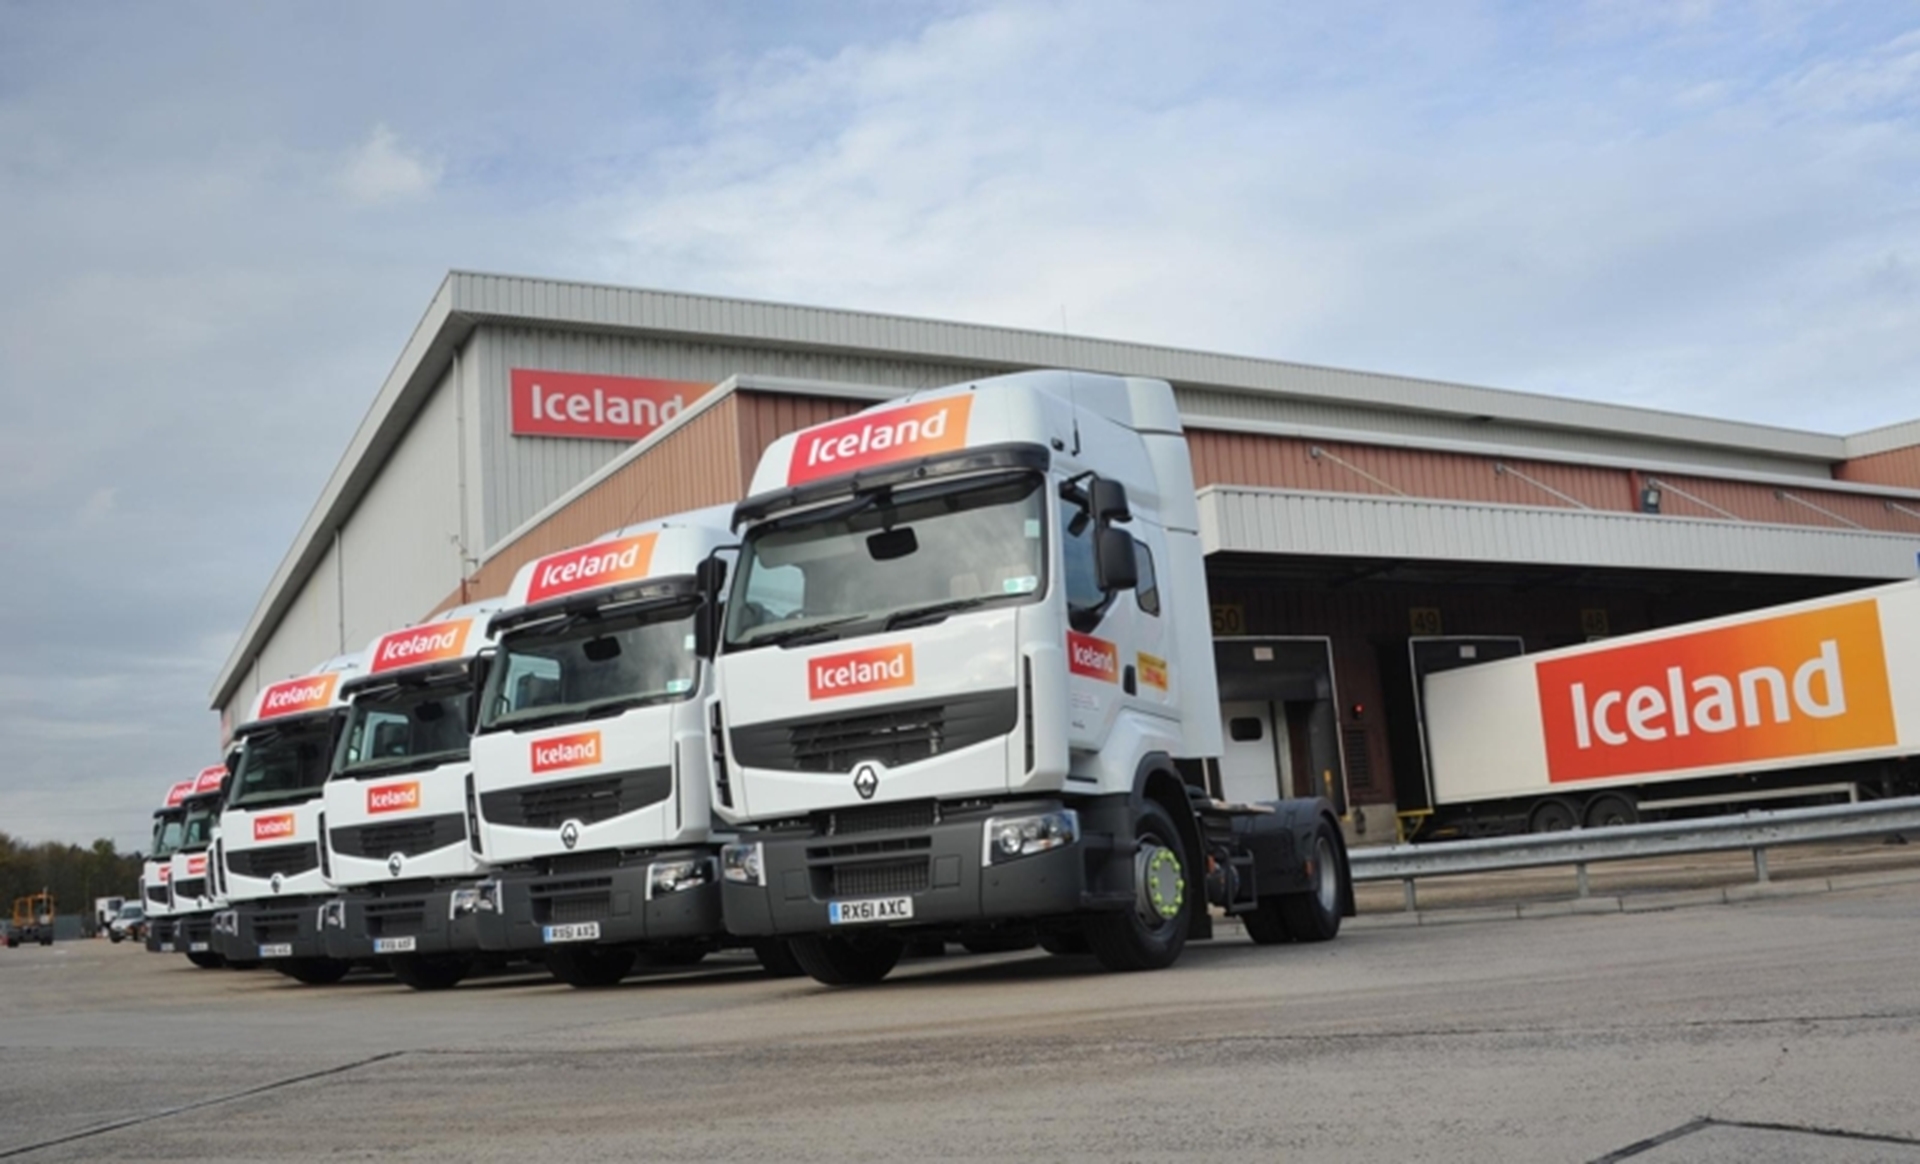 EIGHTY MORE RENAULT TRUCKS GO TO ICELAND